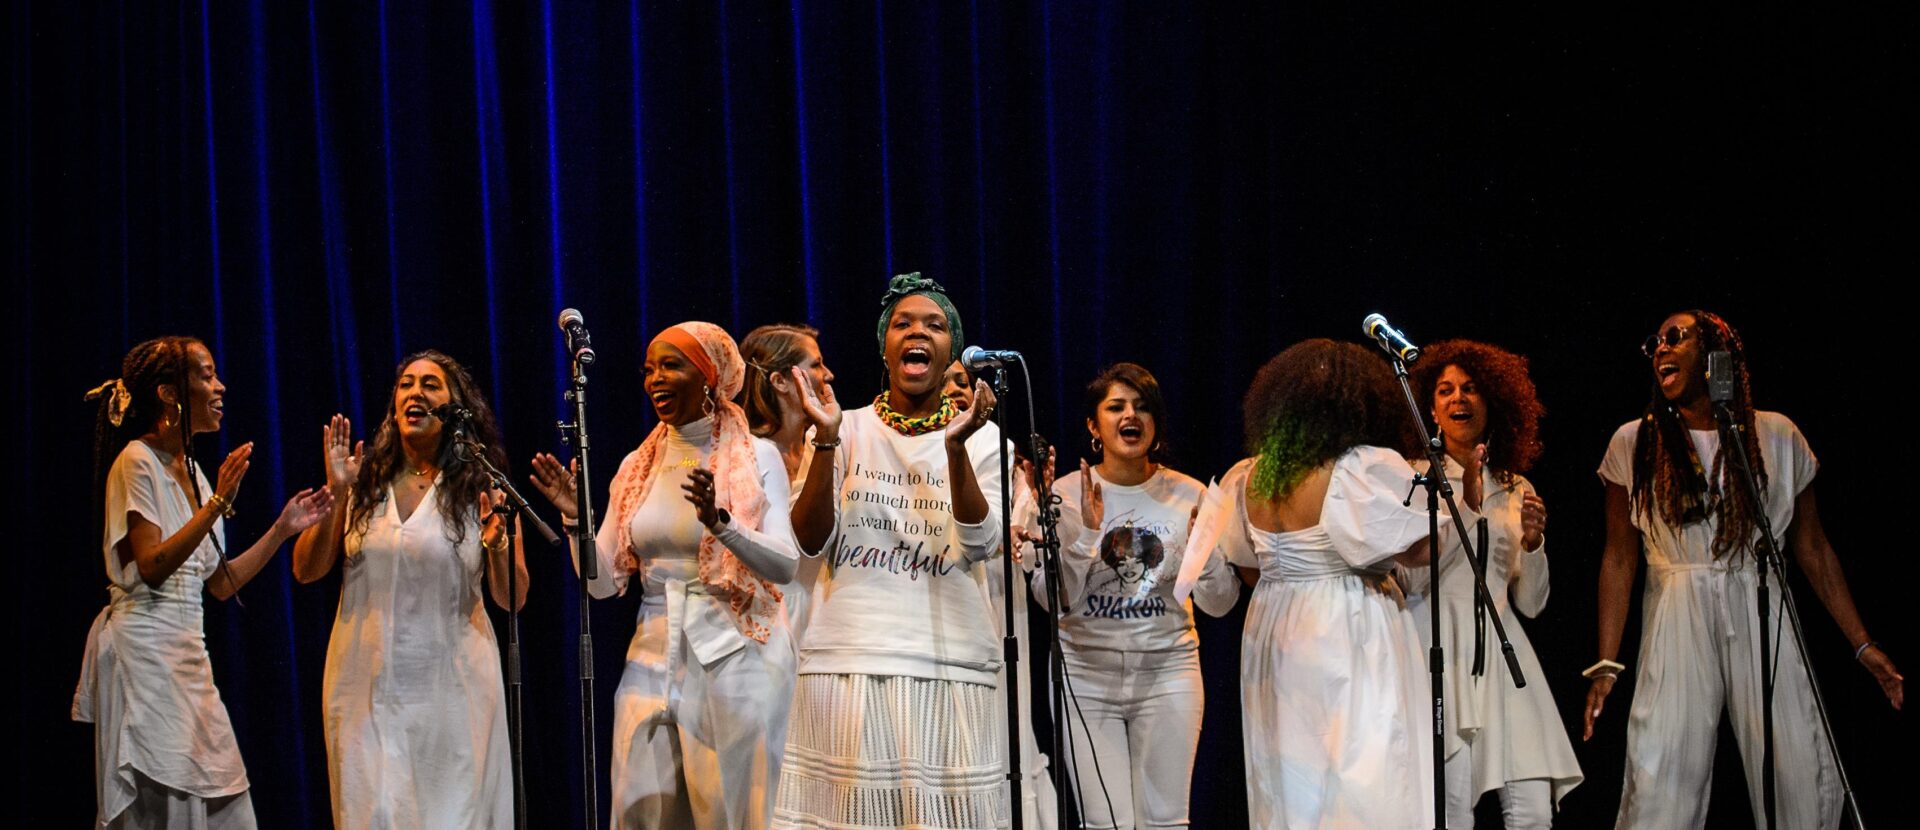 Color photo of a large group of women dressed all in white singing and clapping onstage in front of a dark blue curtain.